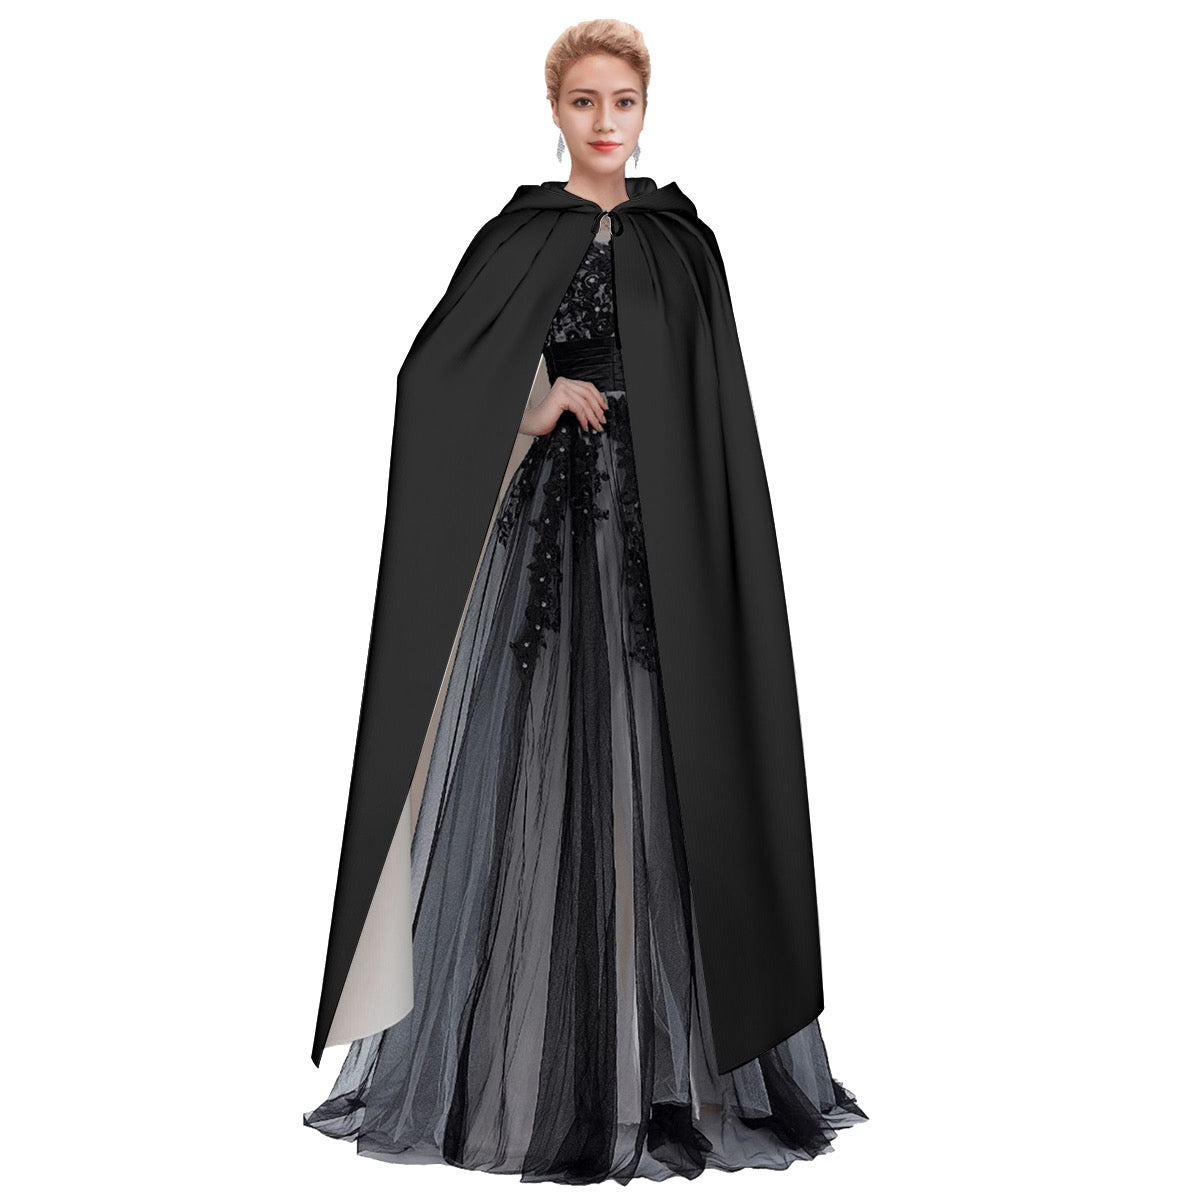 The Witch's Movie Coven Season 2 Goat Unisex Hooded Cloak